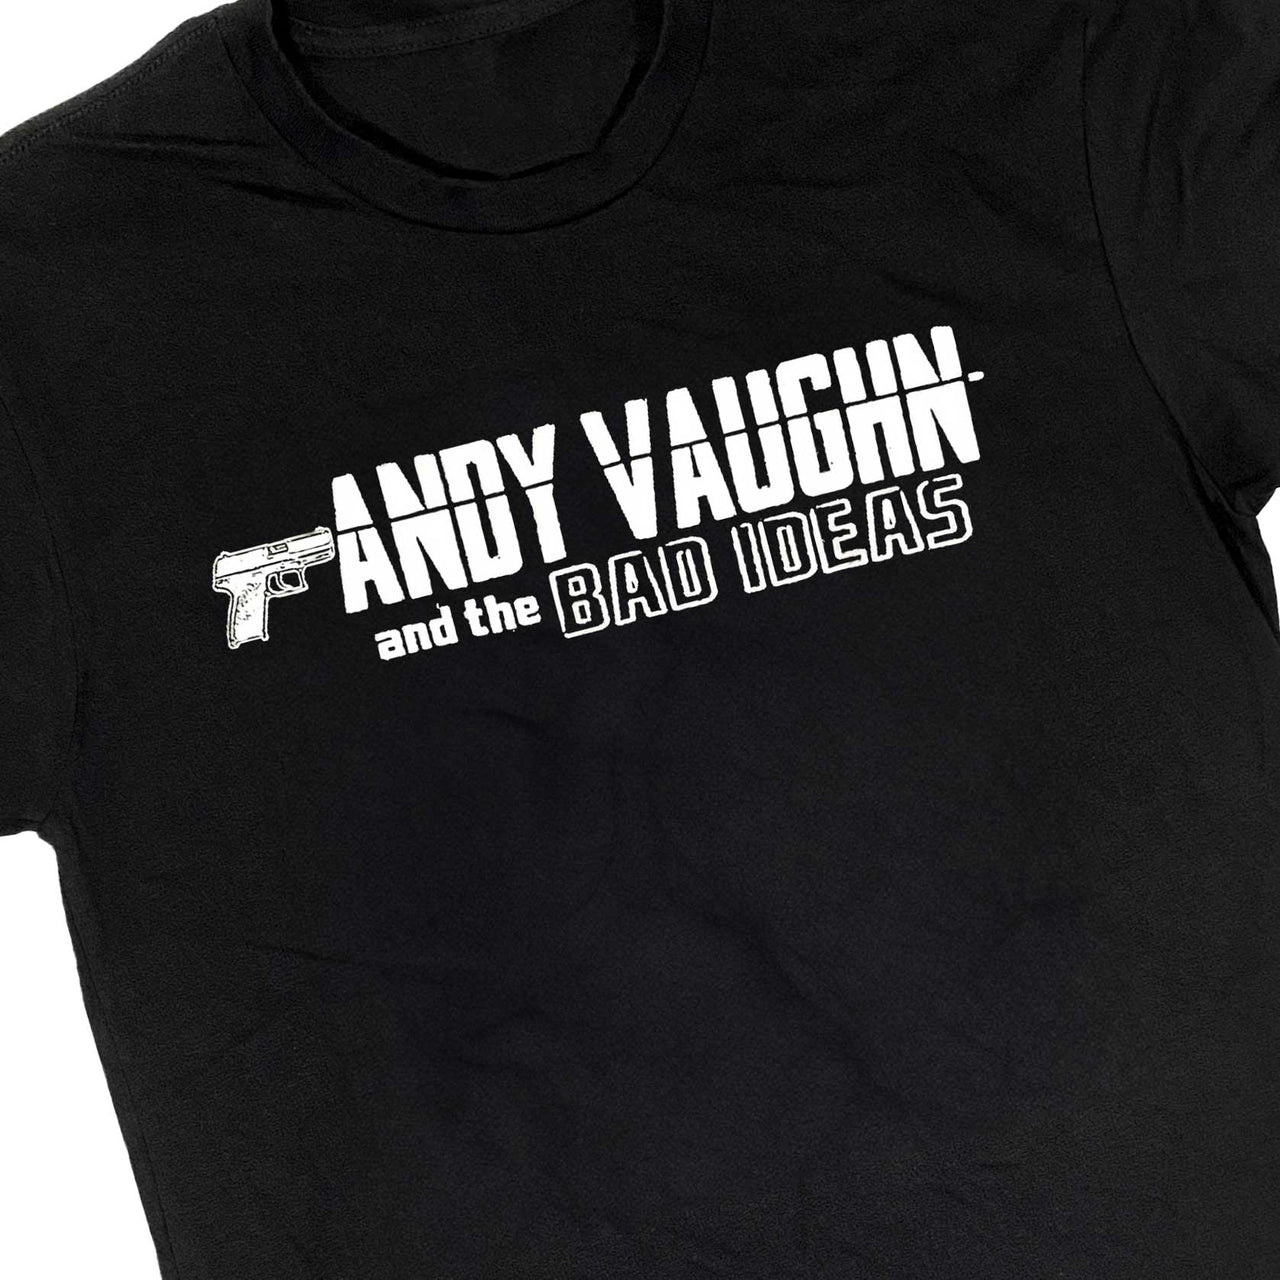 ANDY VAUGHN AND THE BAD IDEAS T-SHIRT